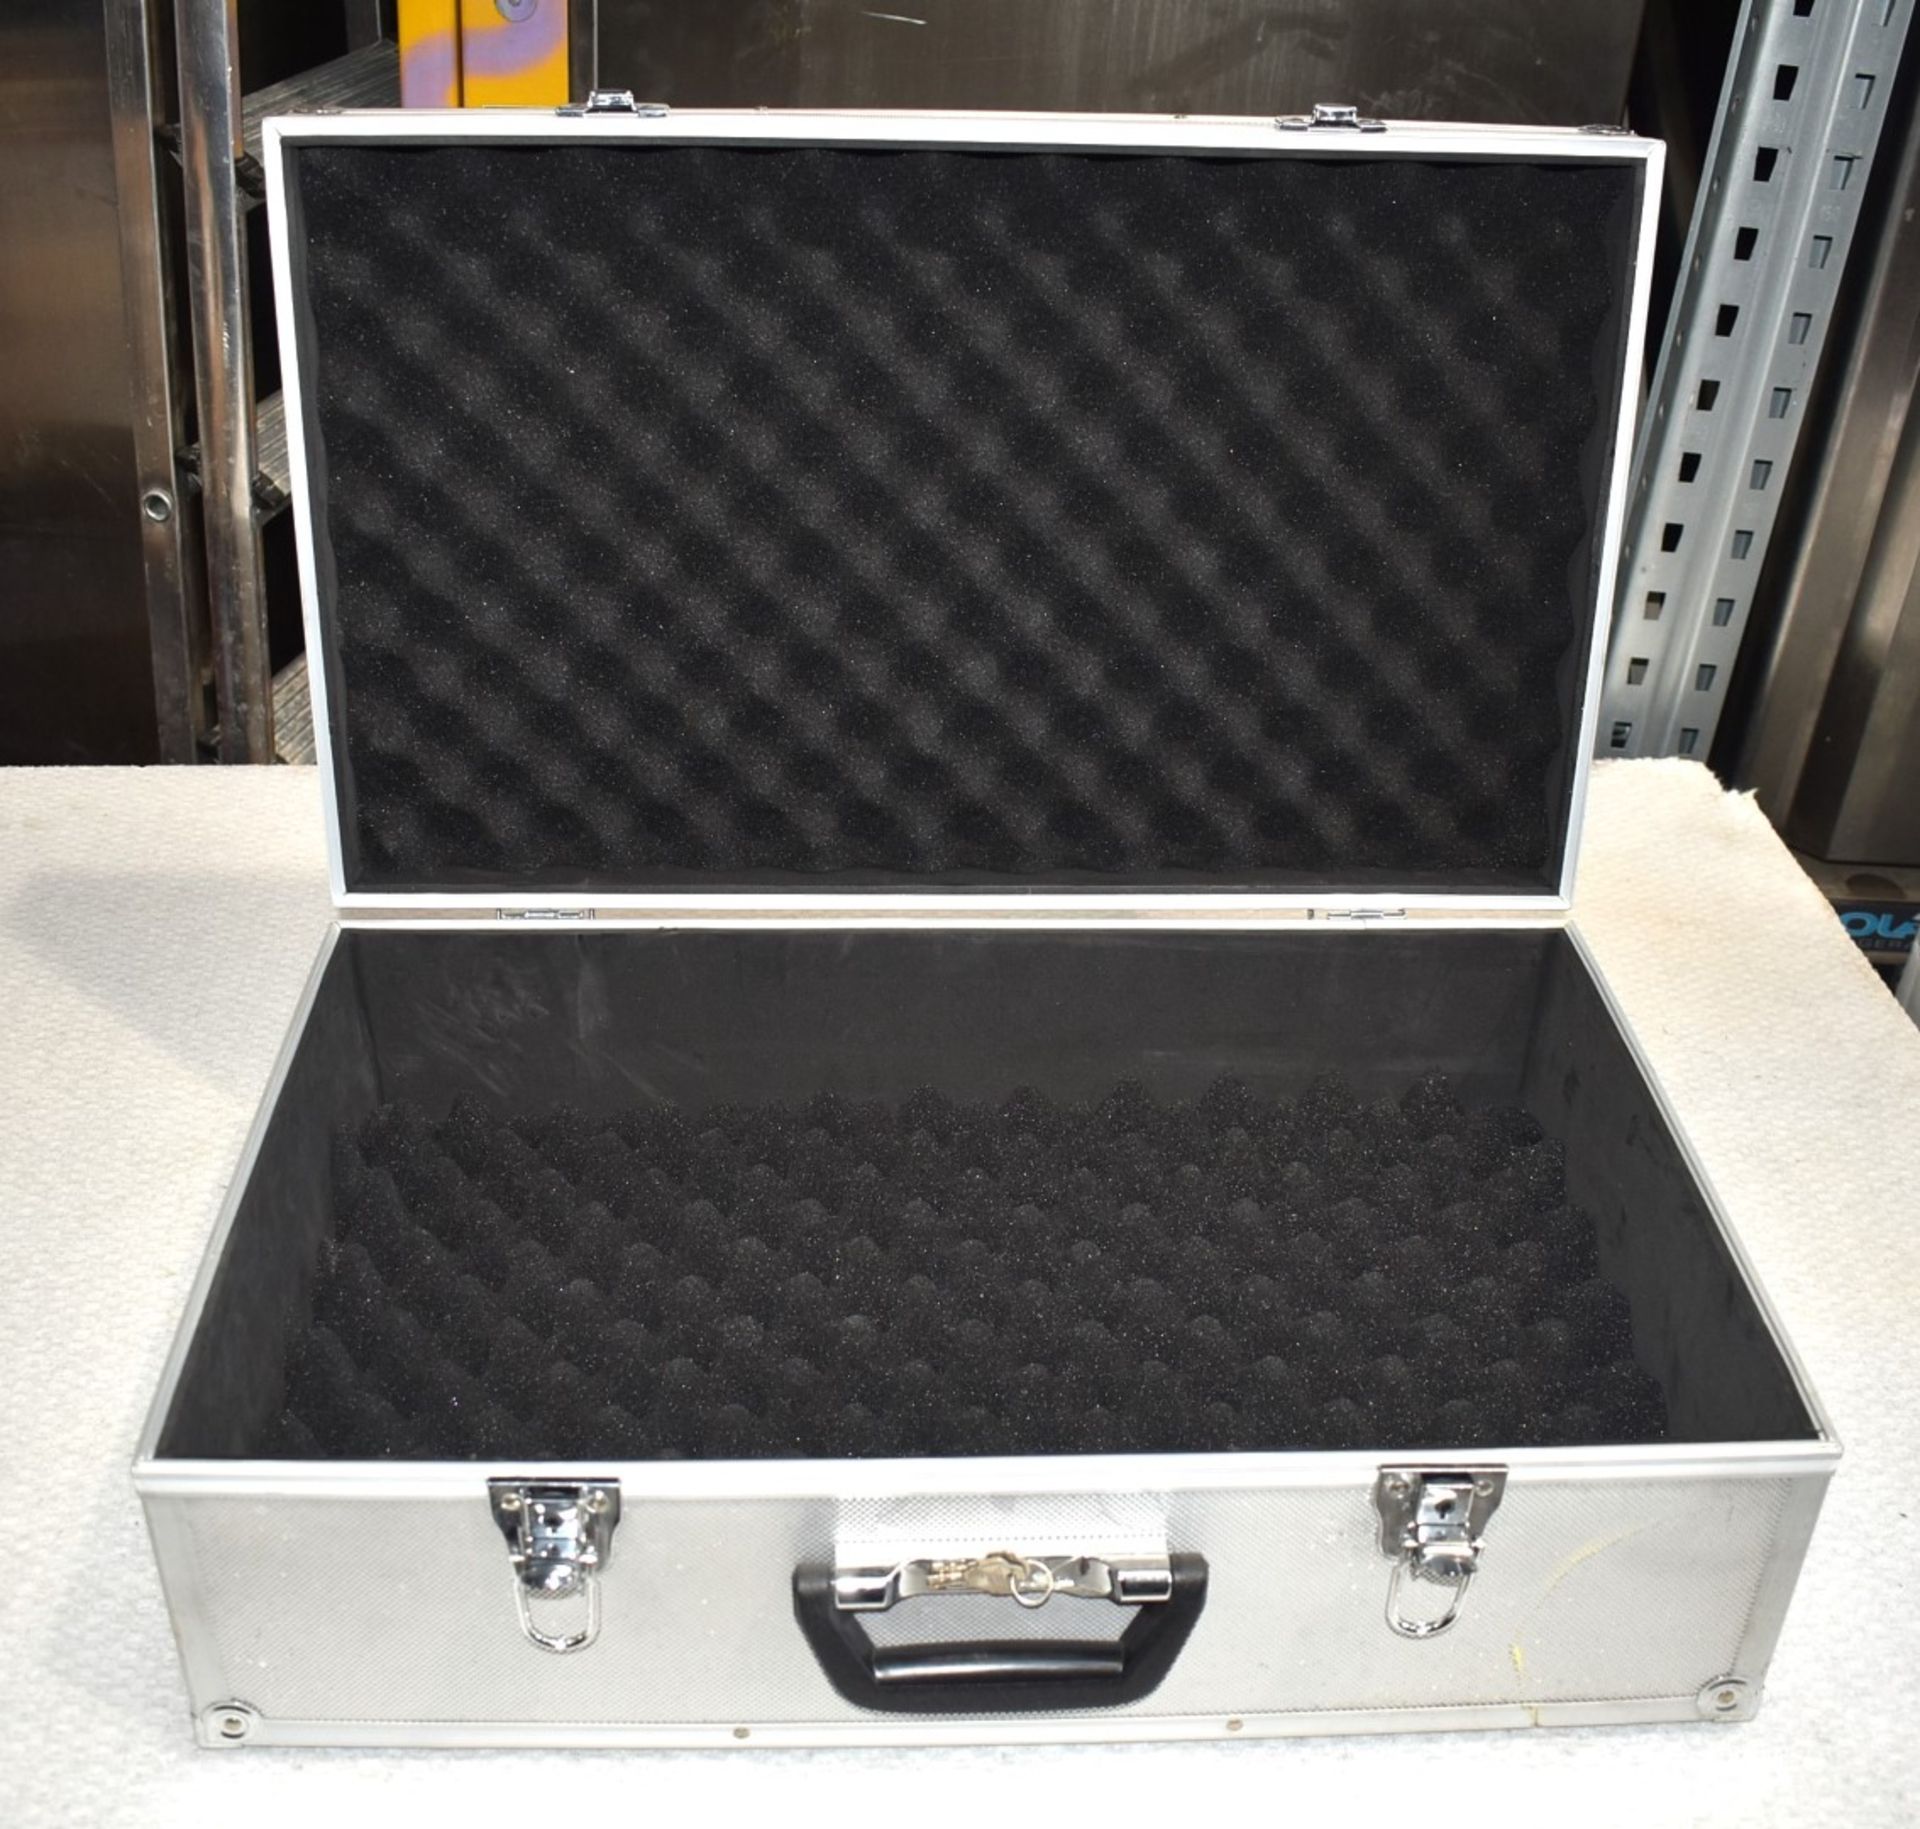 1 x Foam Padded Heavy Duty Transit Case - With Lock and Key - Size: 58 x 35 x 20 cms - Image 2 of 5